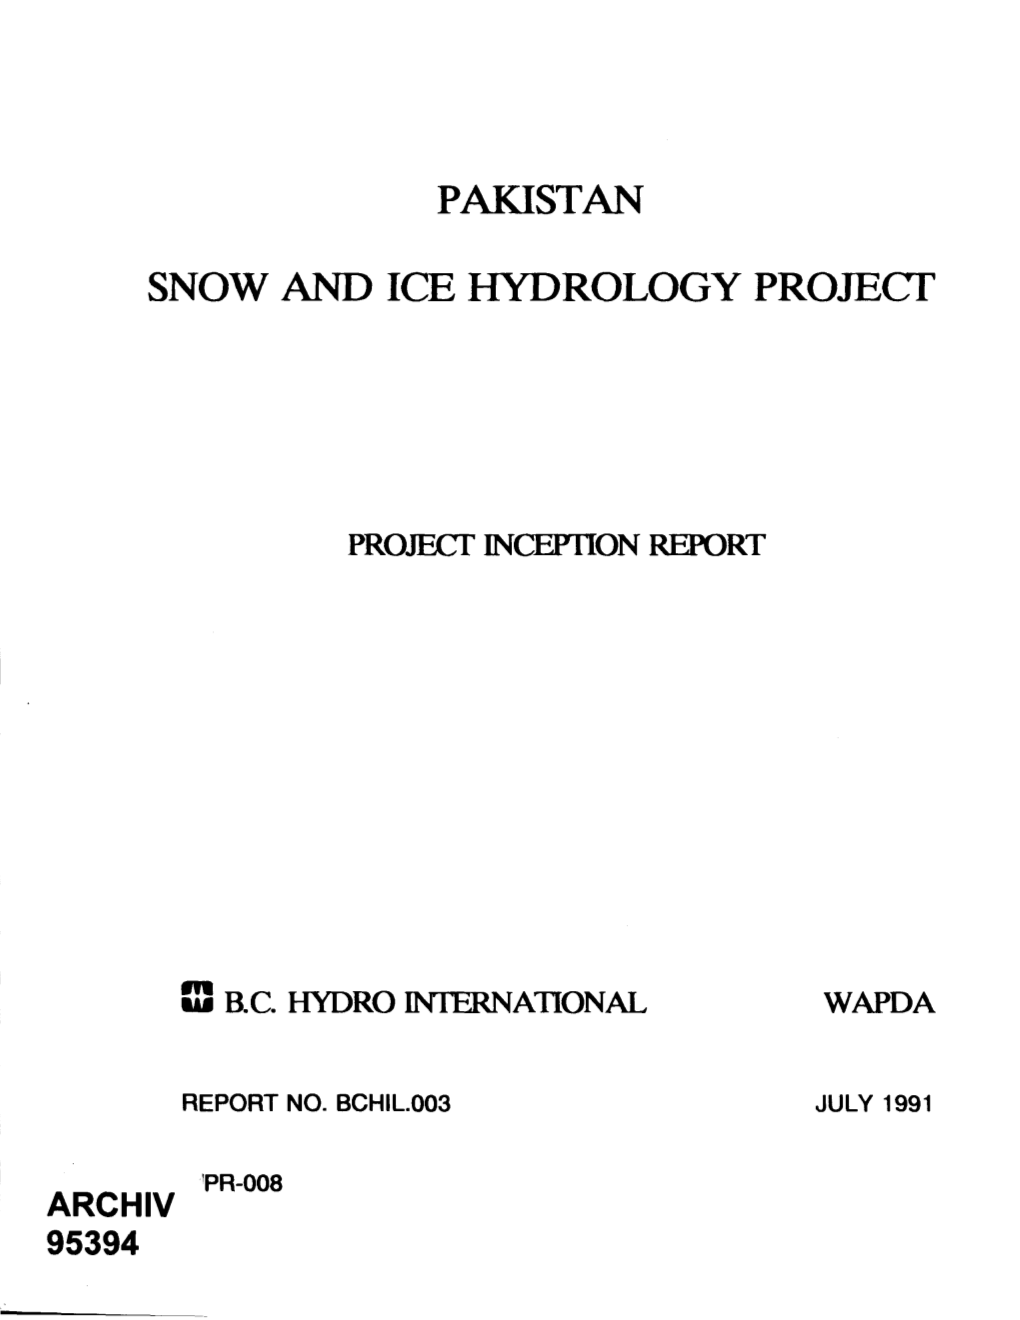 Pakistan Snow and Ice Hydrology Project Project Inception Report